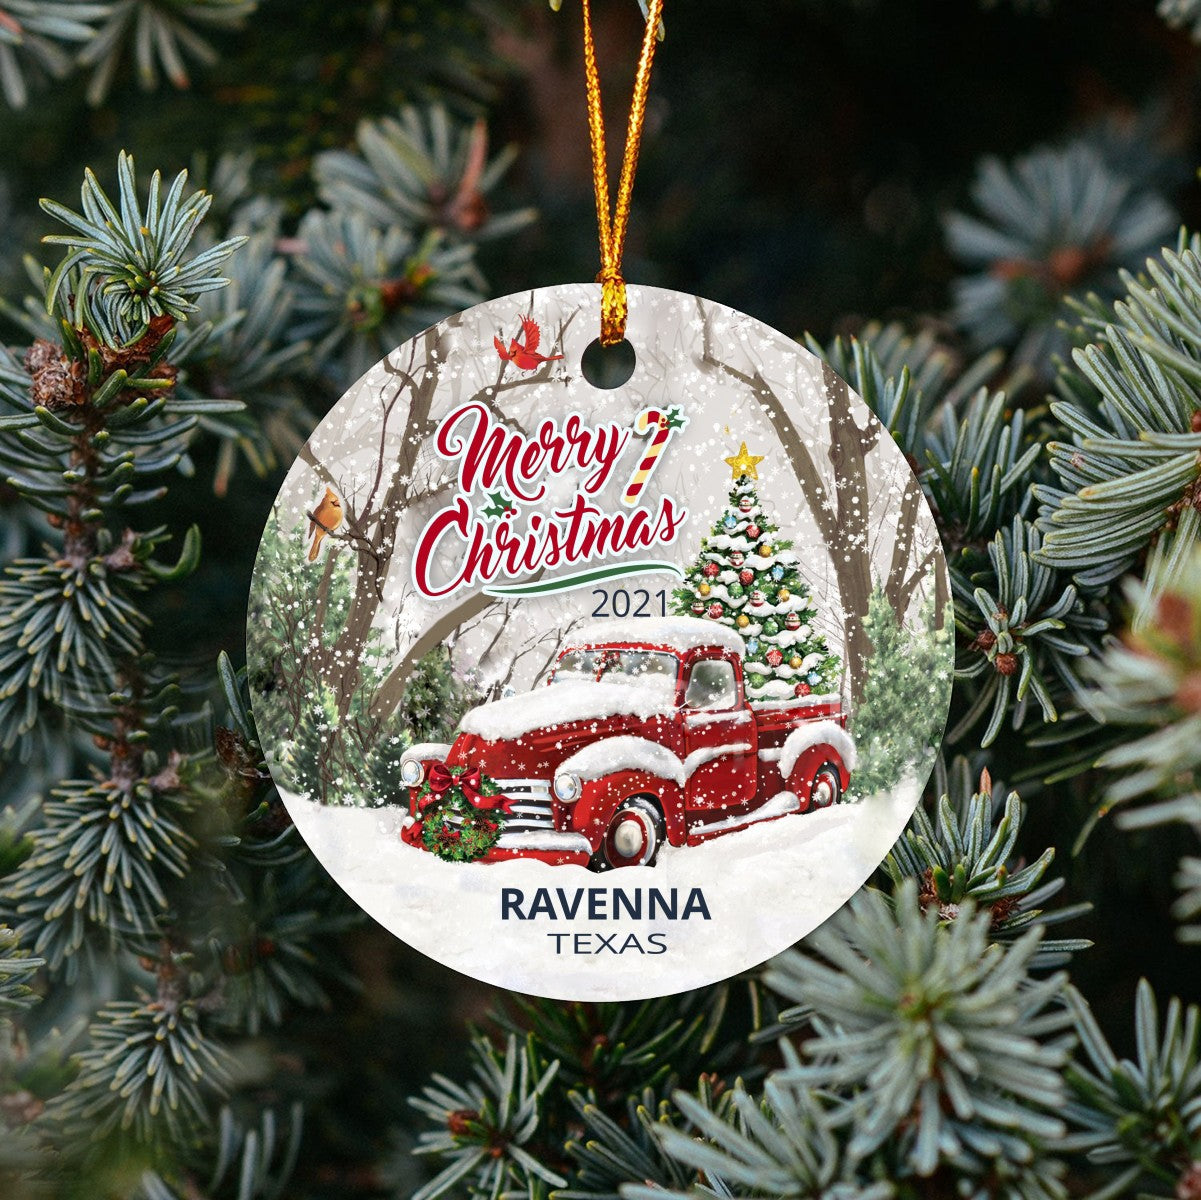 Christmas Tree Ornaments Ravenna - Ornament With Name City, State Ravenna Texas TX Ornament - Red Truck Xmas Ornaments 3'' Plastic Gift For Family, Friend And Housewarming